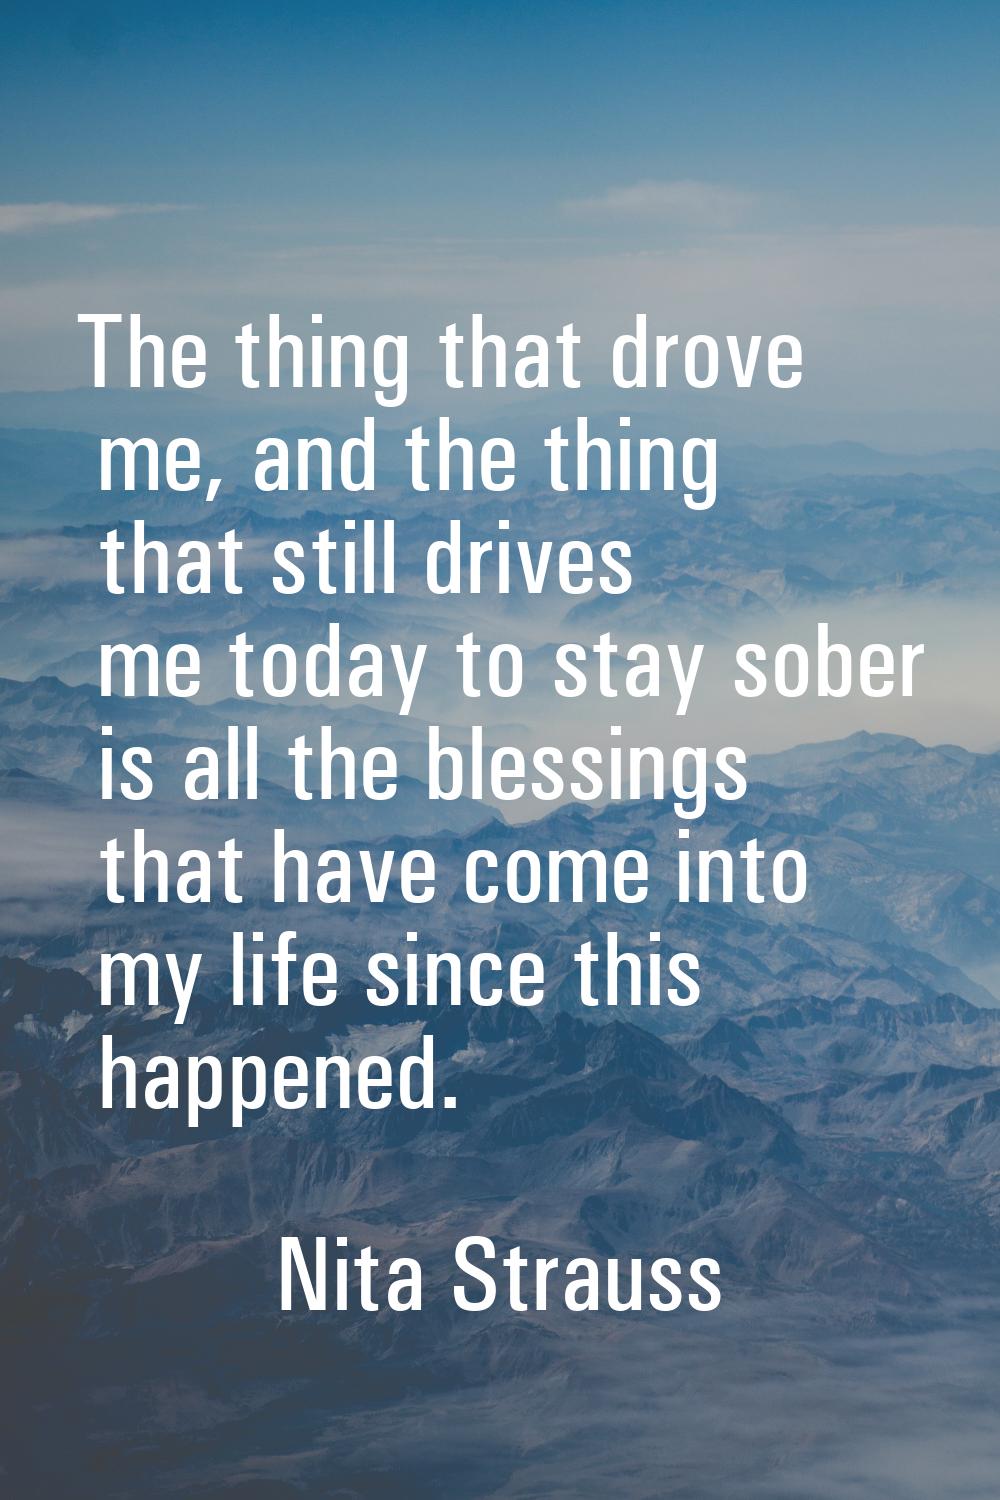 The thing that drove me, and the thing that still drives me today to stay sober is all the blessing